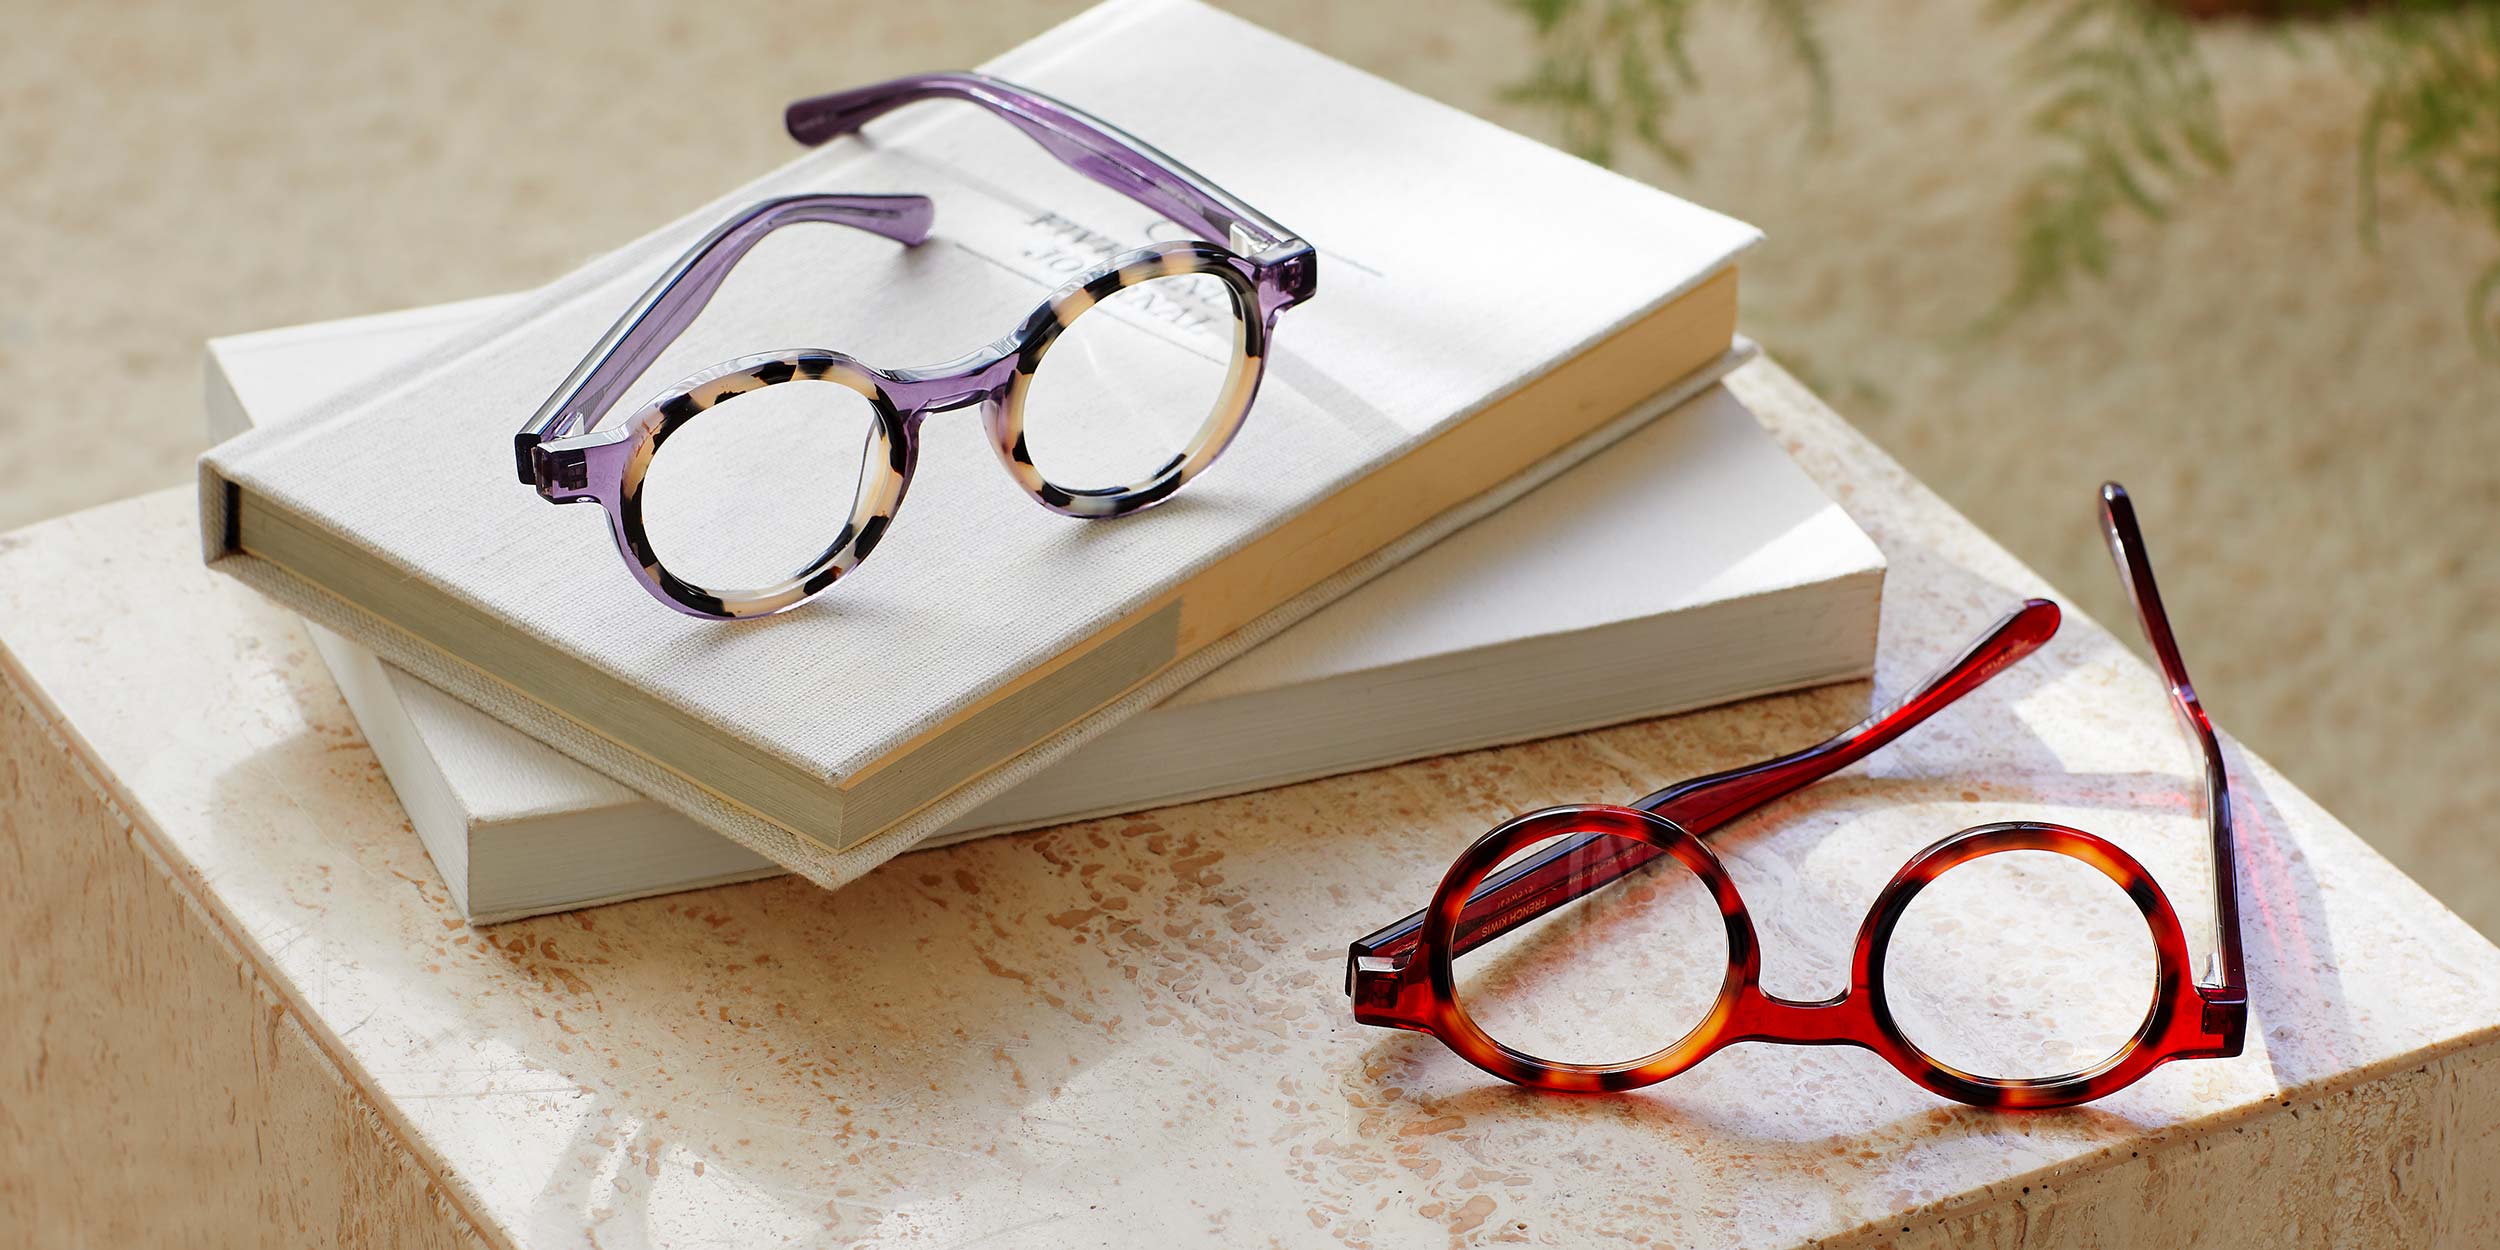 Photo Details of Loïs Black & Grey Marble Reading Glasses in a room